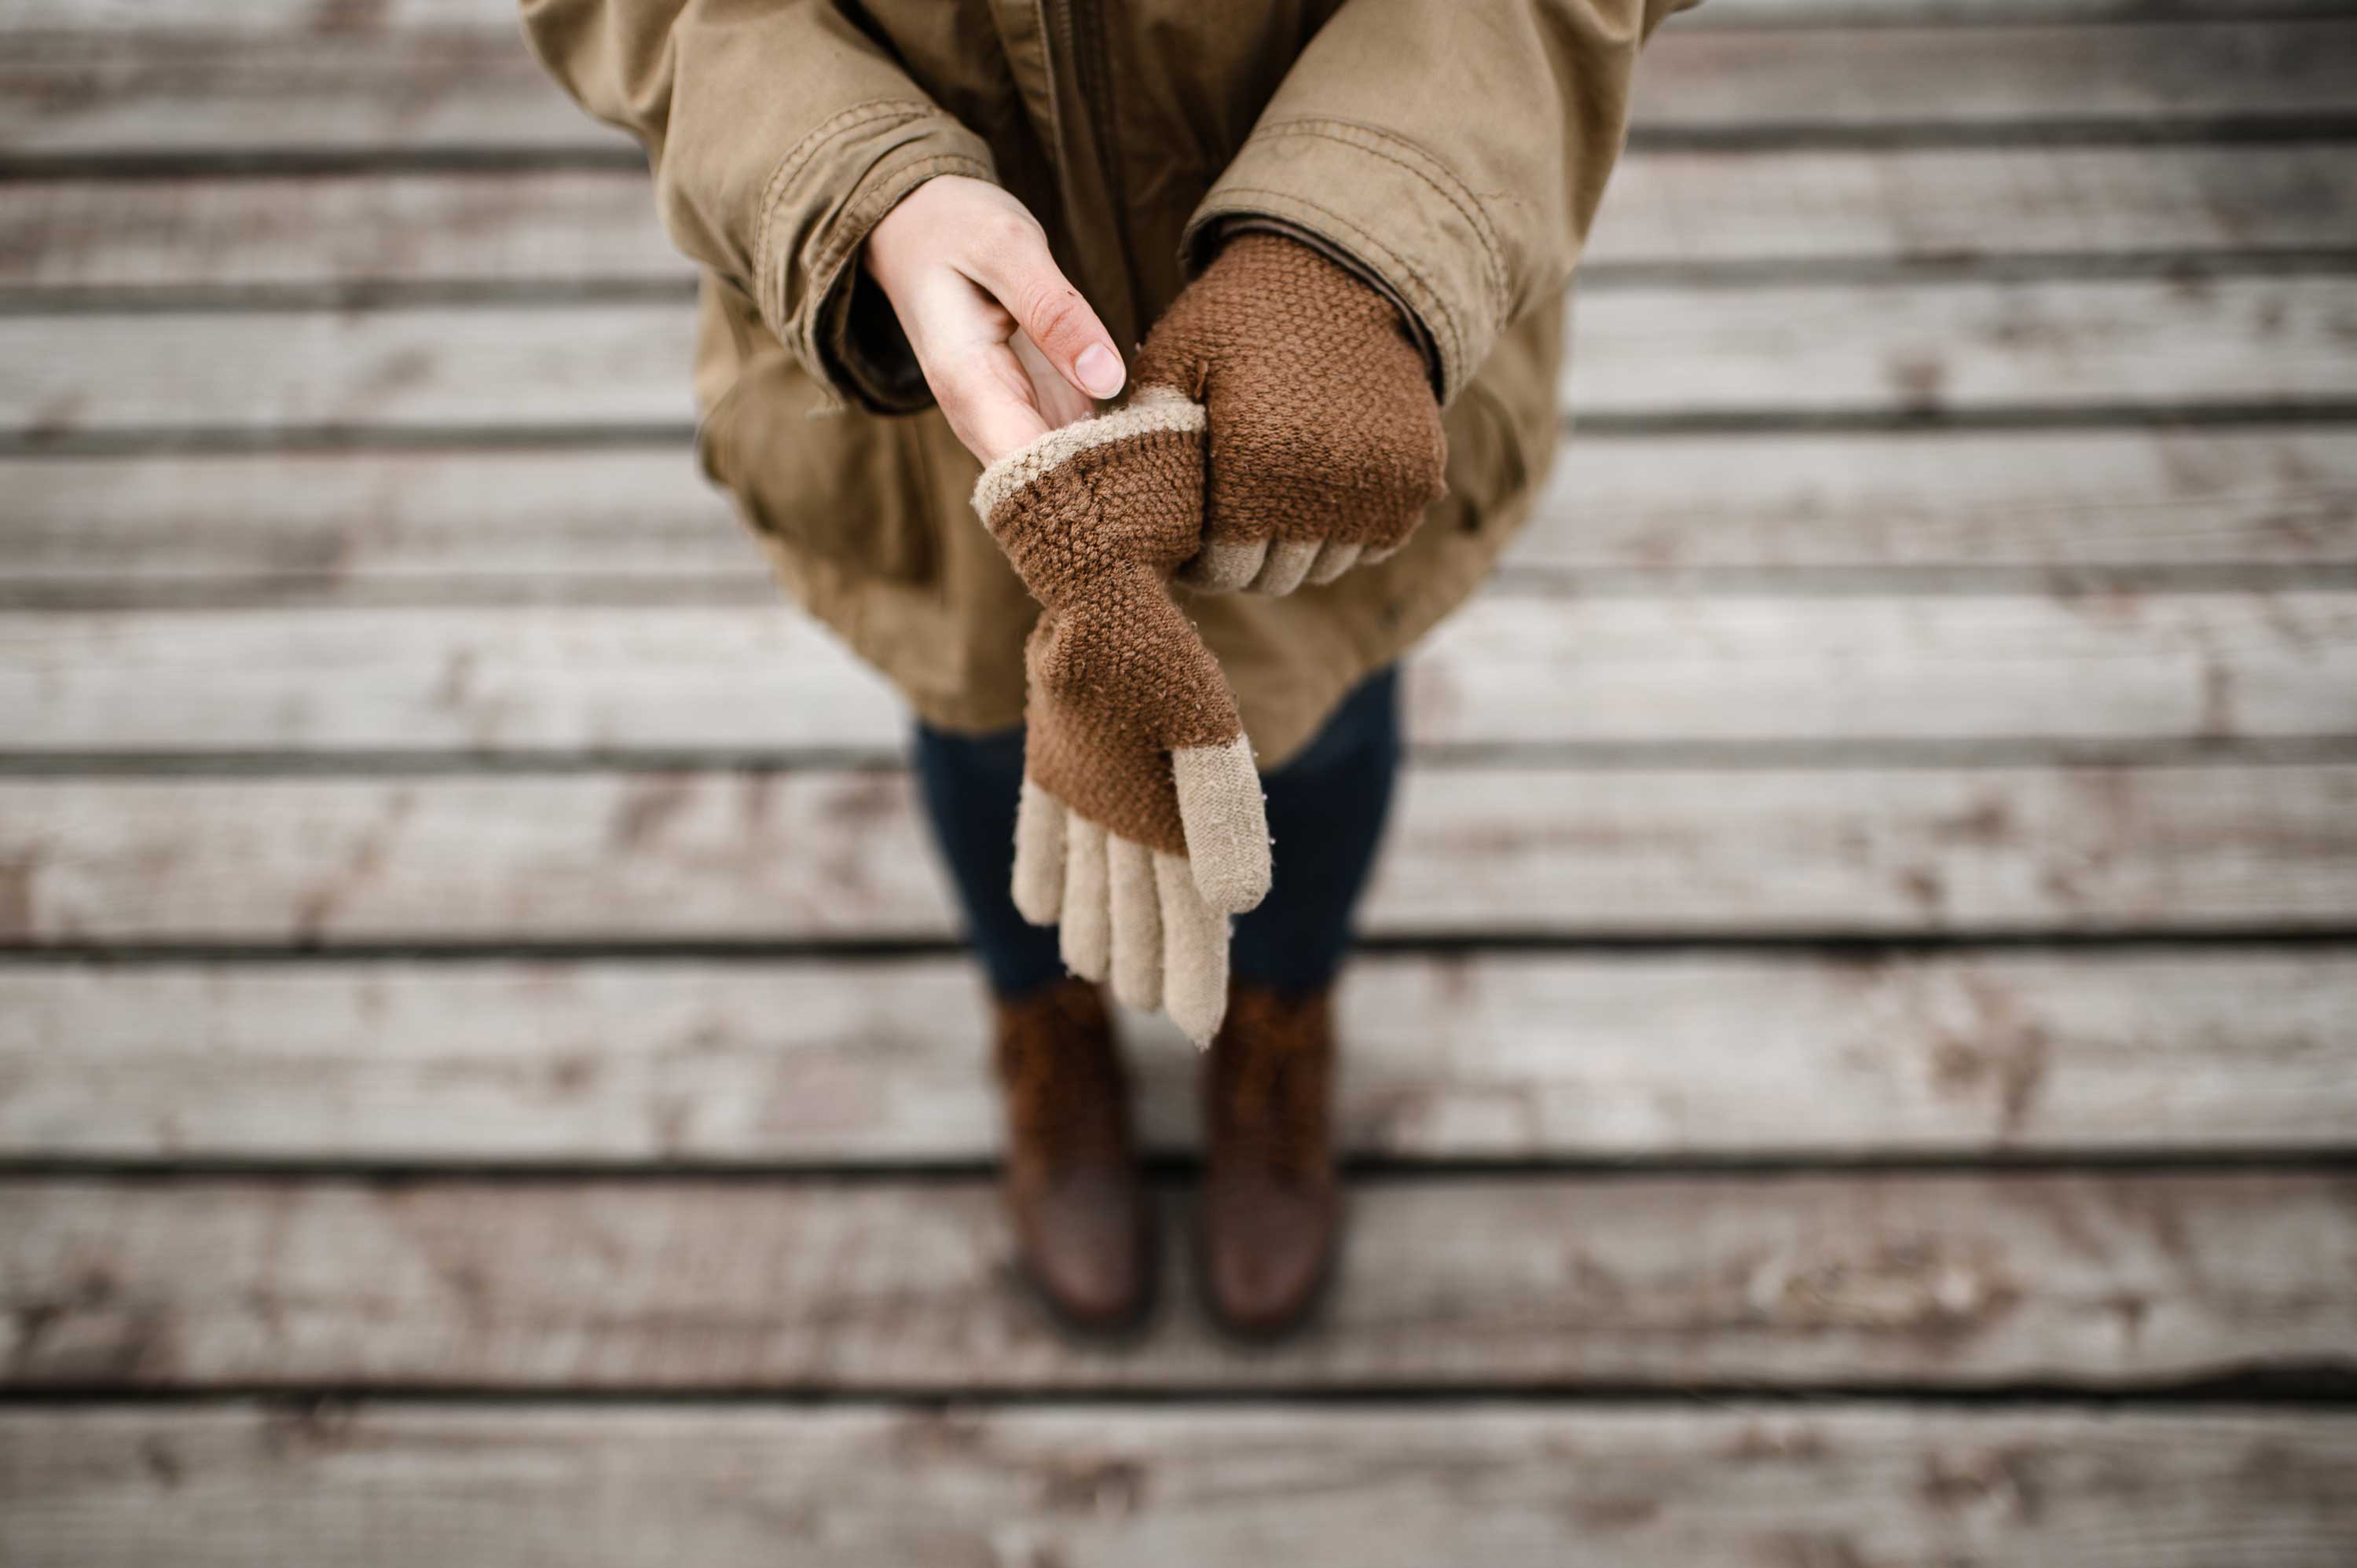 A woman puts on brown gloves.